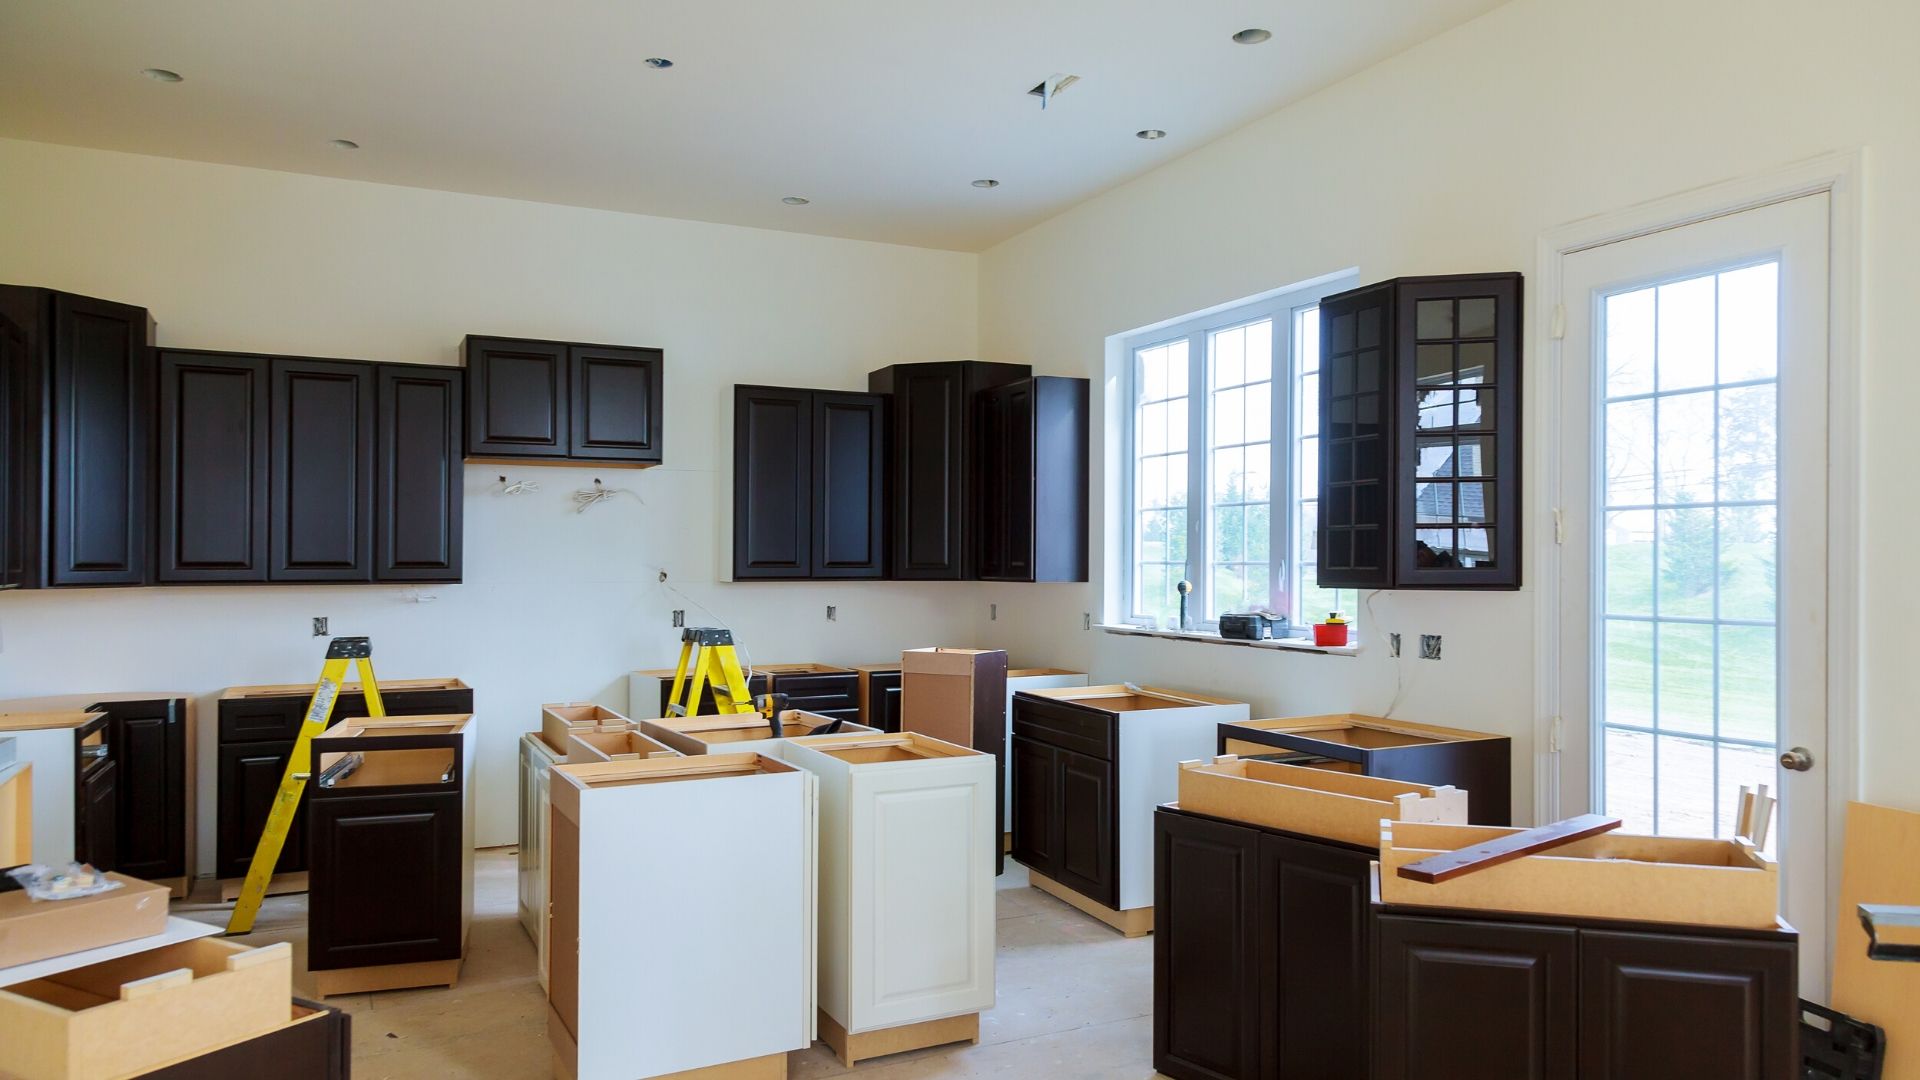 What's the Difference Between a Remodel and a Renovation?